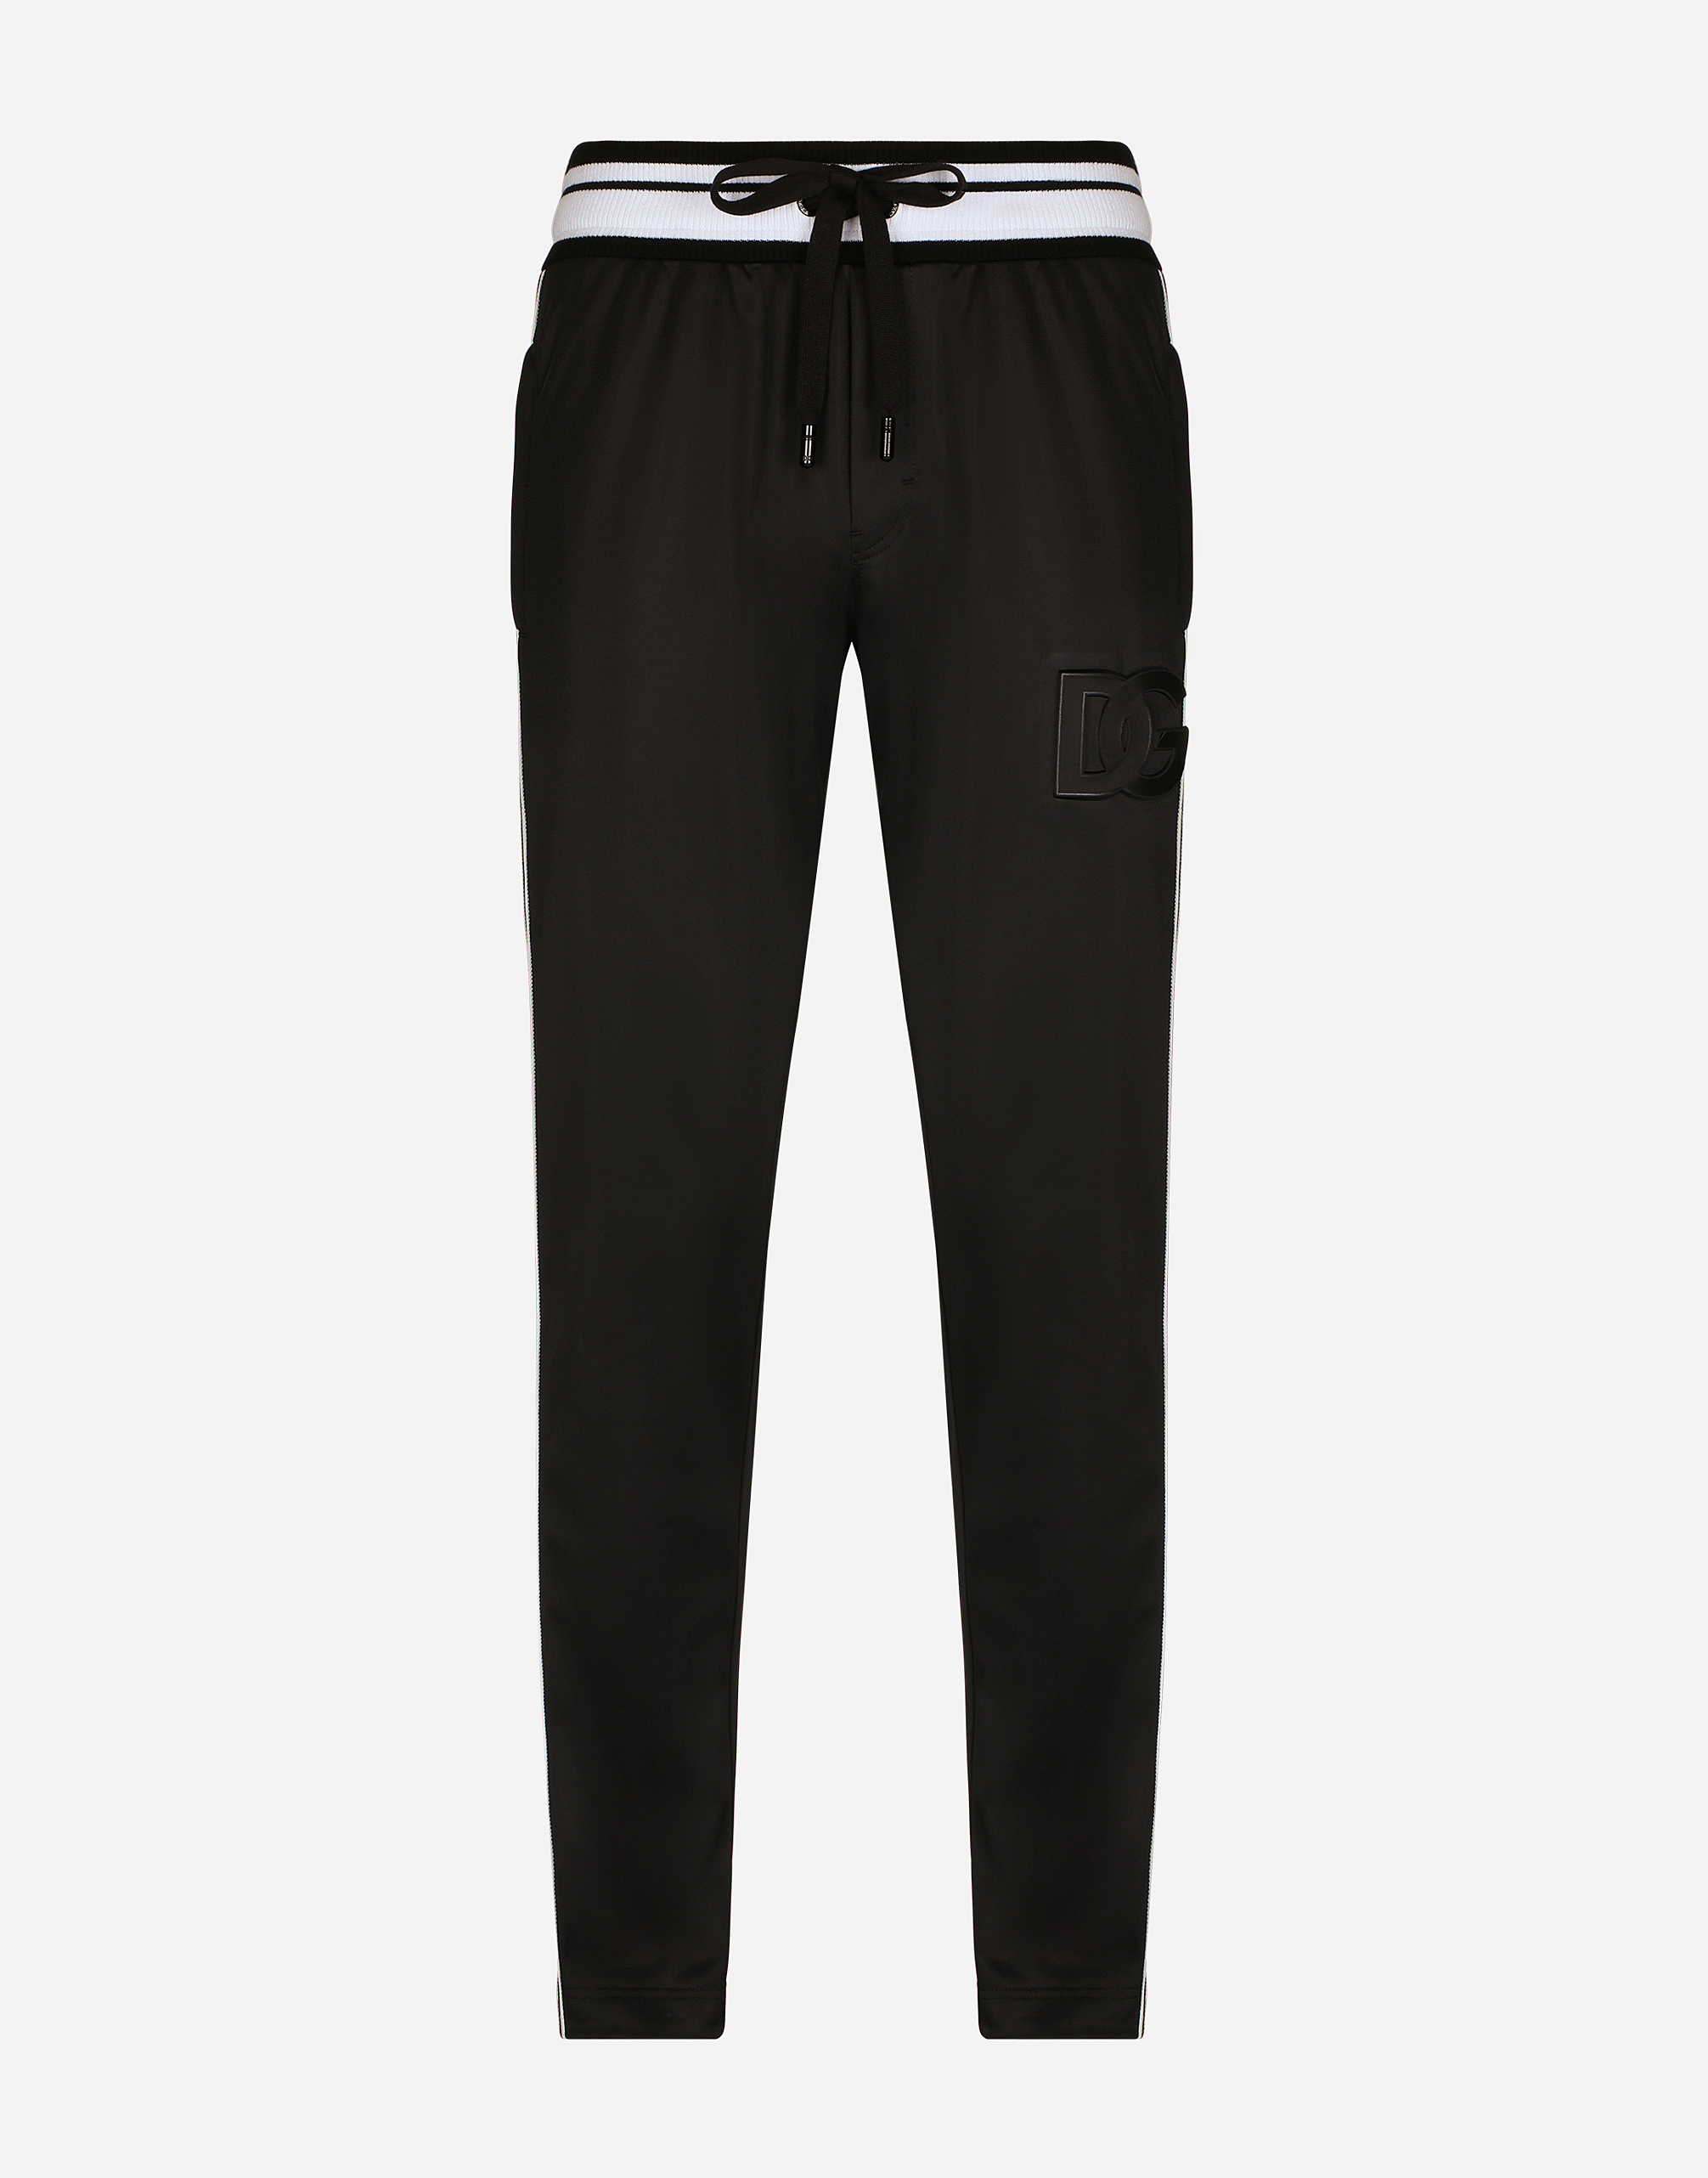 Jogging pants with DG logo and bands in Black